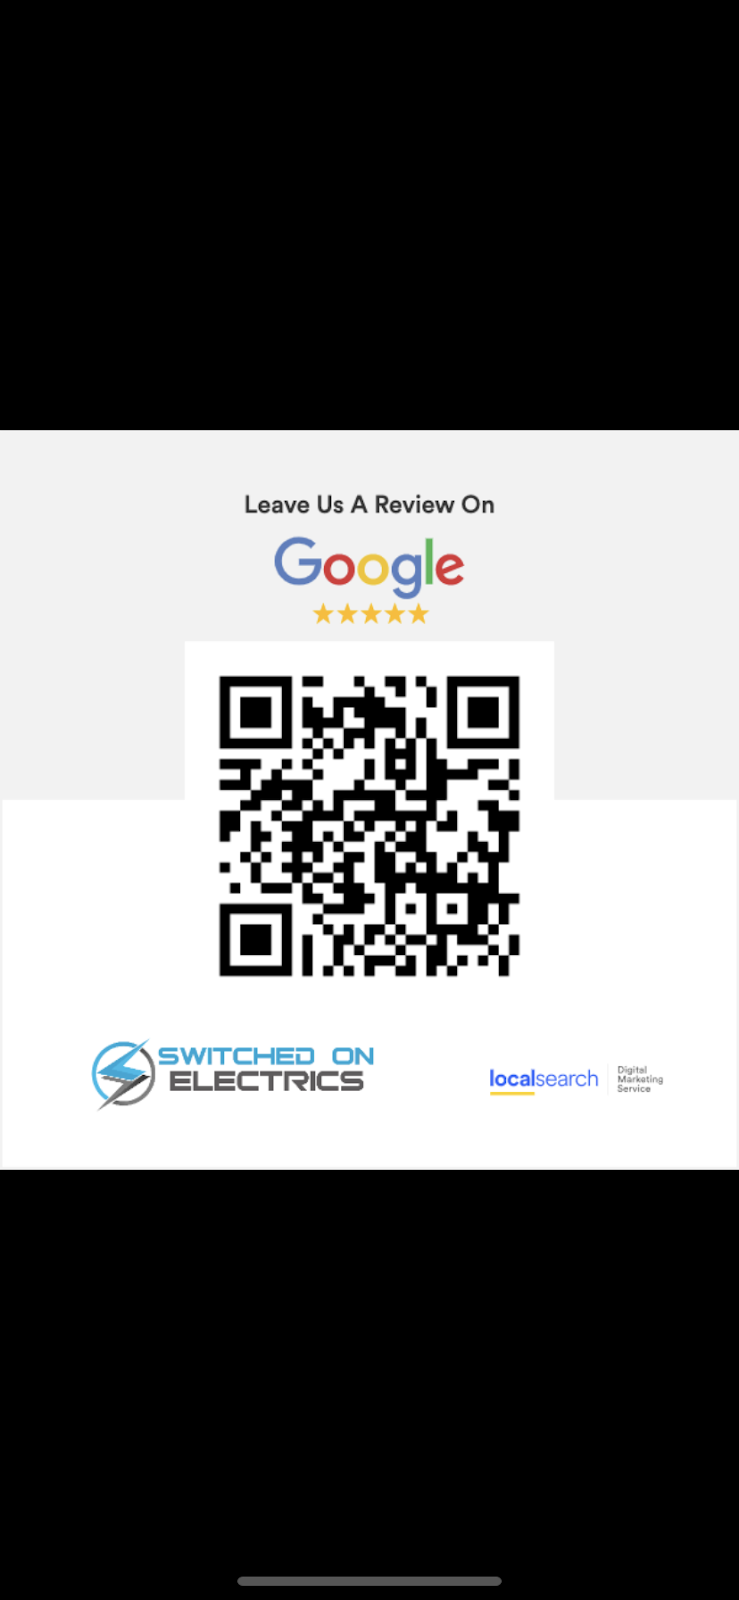 Switched On Electrics | electrician | 4 Windouran St, Gobbagombalin NSW 2650, Australia | 0403610608 OR +61 403 610 608